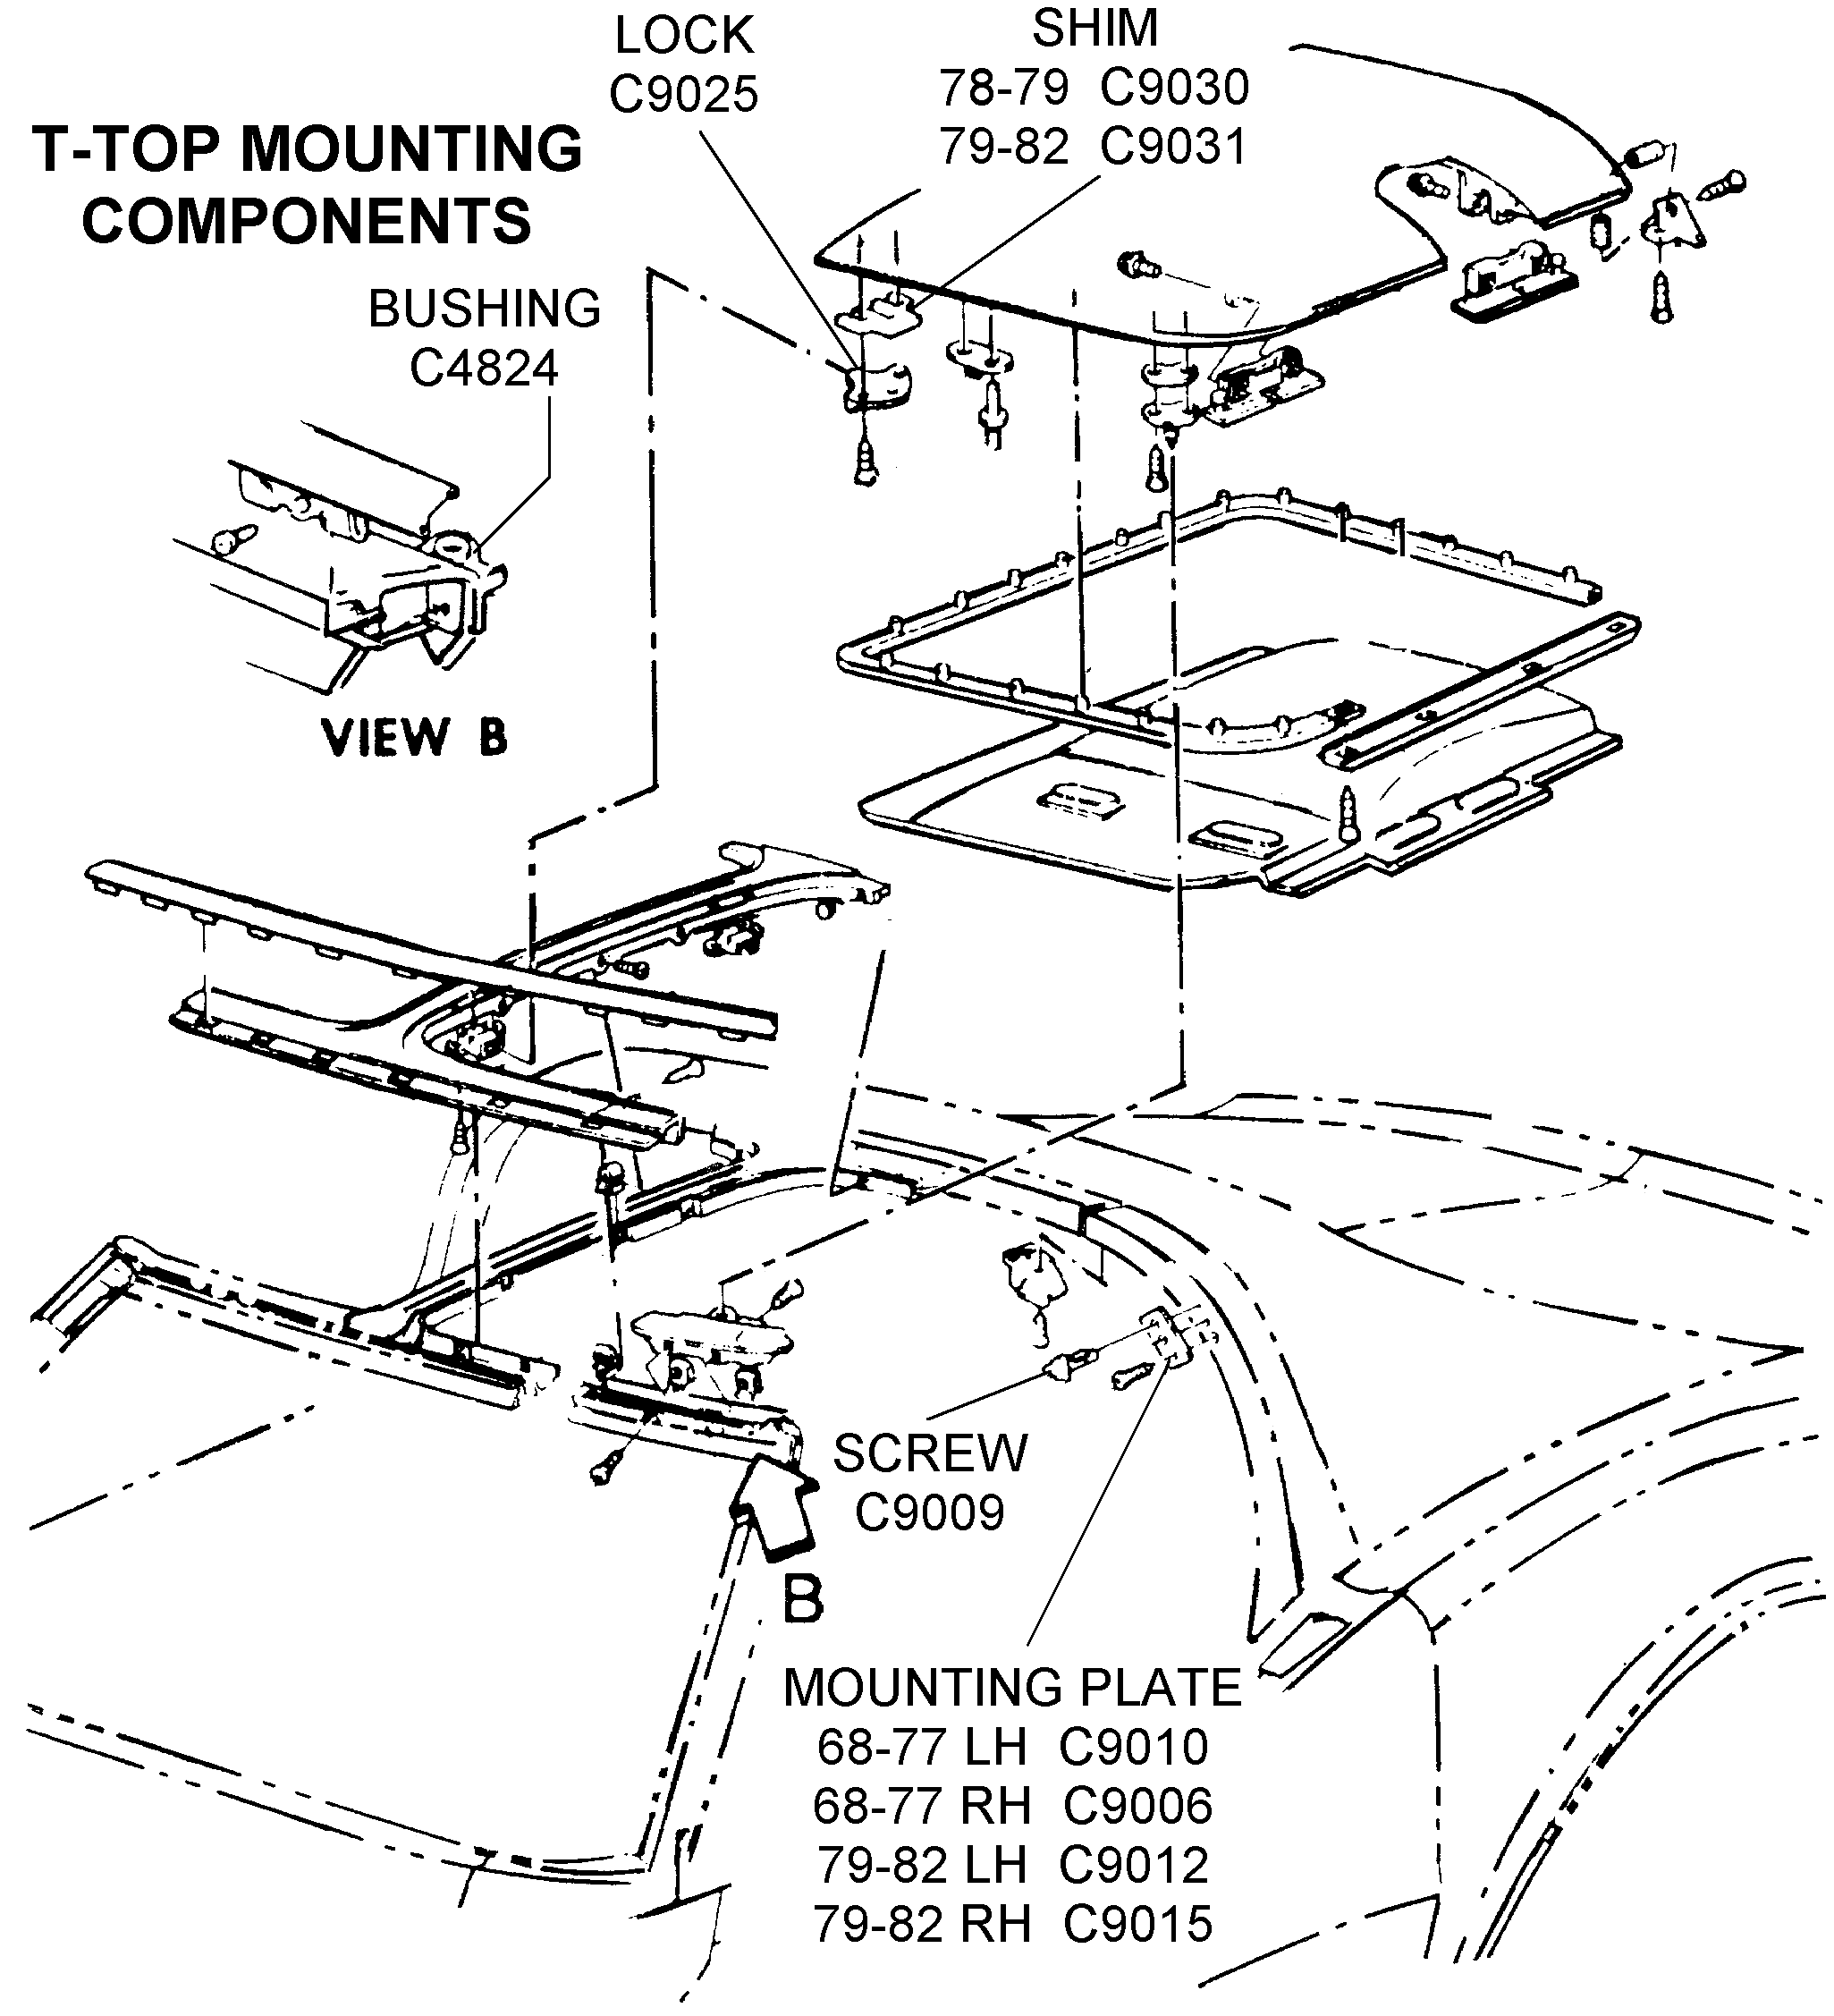 T Top Mounting Components Diagram View Chicago Corvette Supply